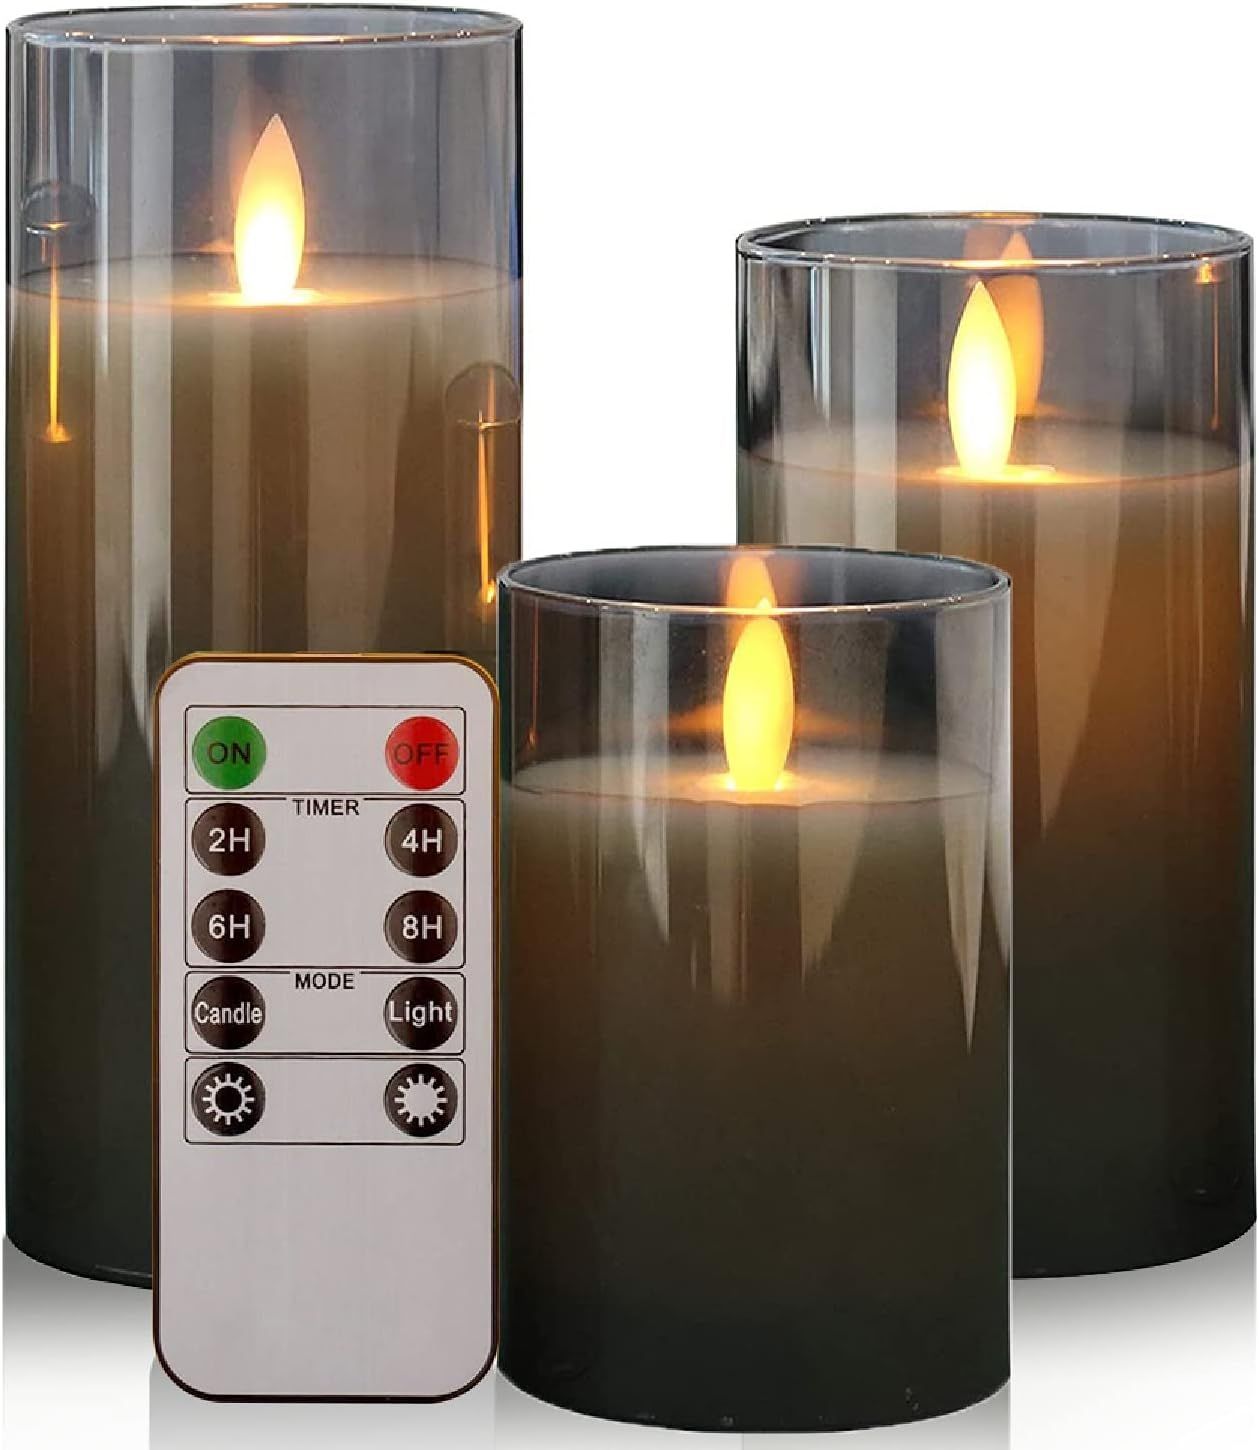 LED Flameless Candle with Remote Control decor lovers decoration ideas decor luxury furniture | Amazon (US)